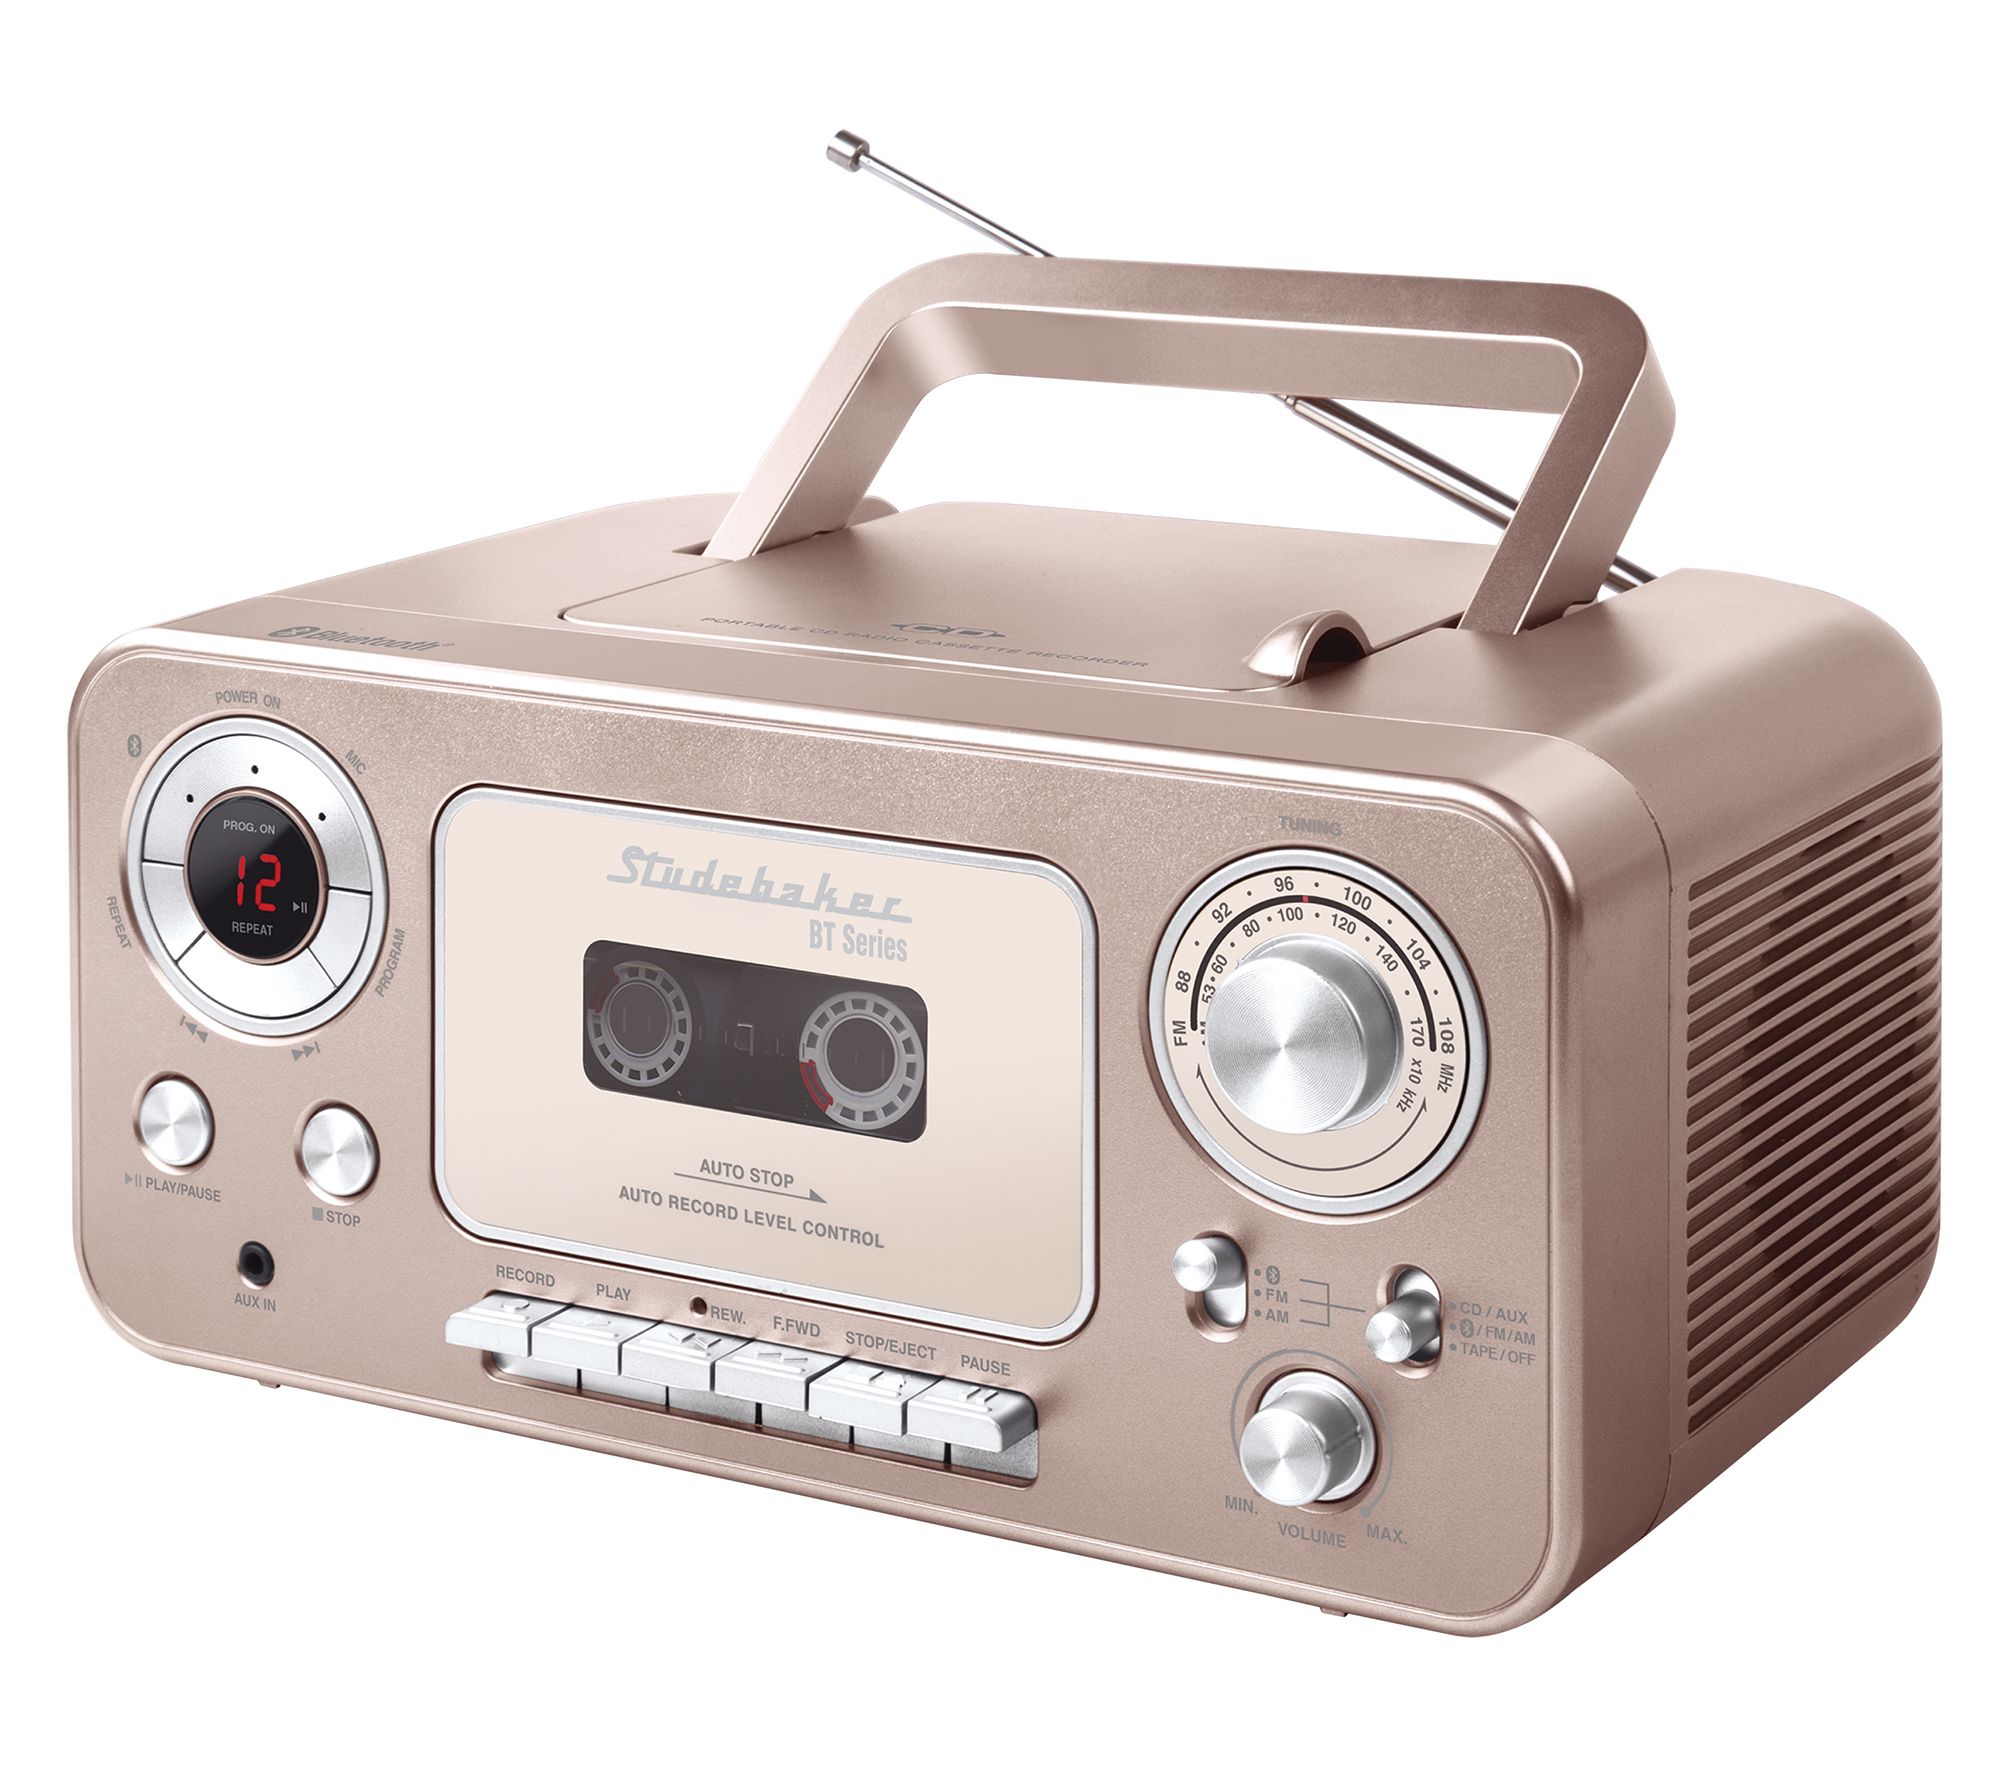 Retro Radio and Recorder,Retro Bluetooth Boombox Cassette Player,AM/FM  Radio Cassette Player Recorder,Classic 80s Style with Modern  Technology,Gifts